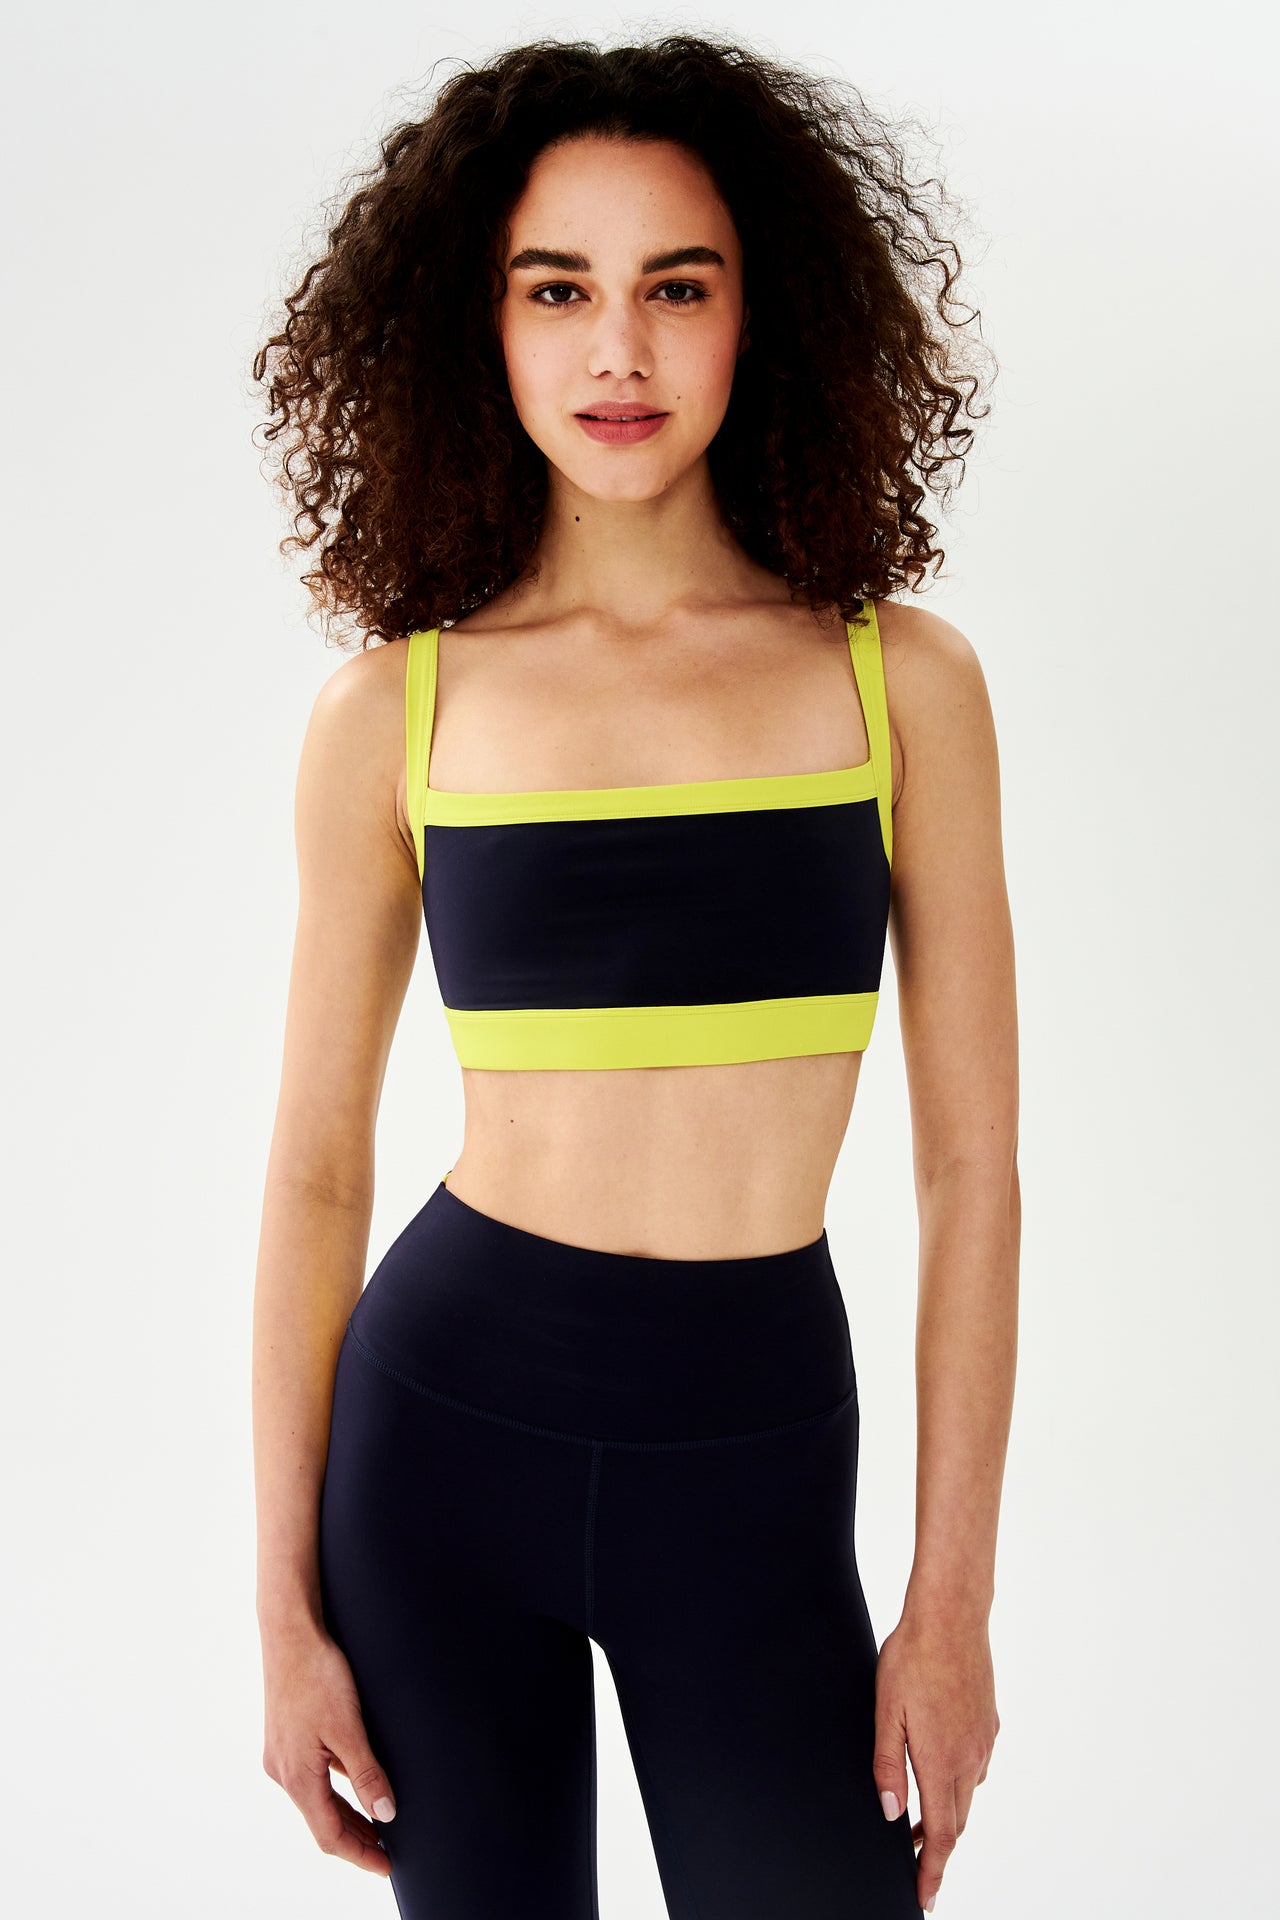 The model is wearing a Monah Rigor Bra in Indigo/Chartreuse, designed by SPLITS59 for comfort and support during workouts.